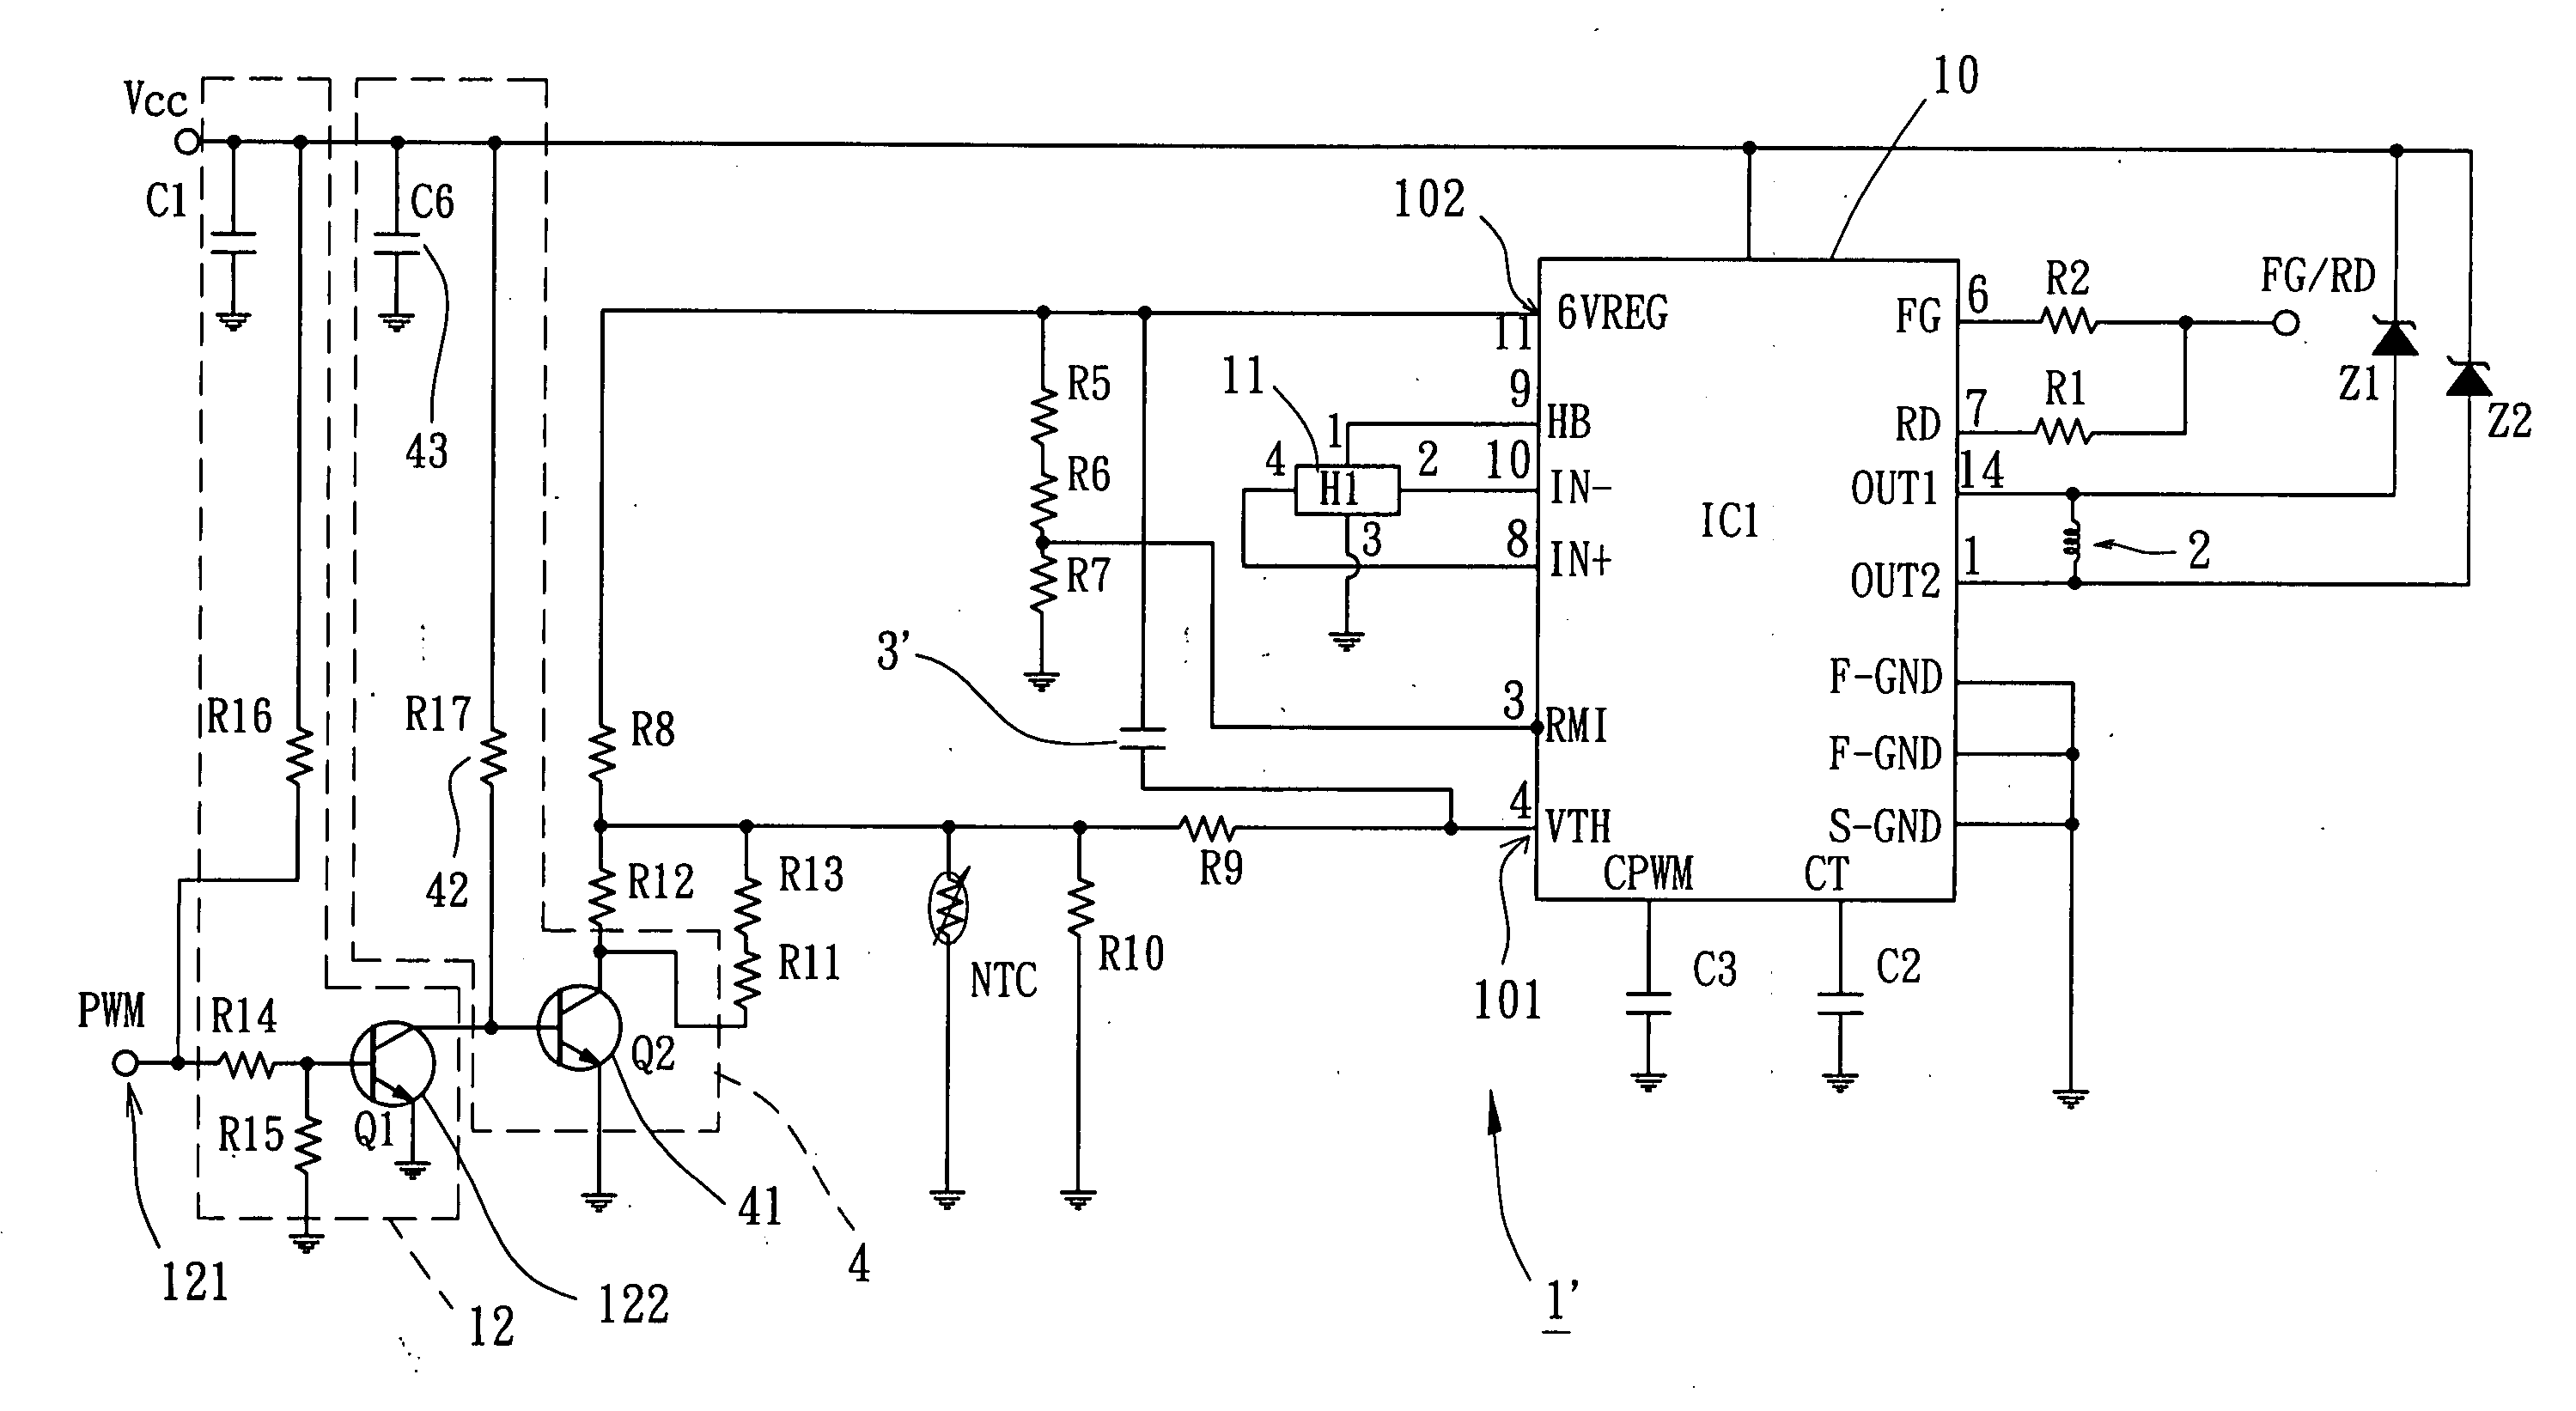 Frequency-variable pulse-width-modulation motor drive circuit capable of operating under different pwm frequencies